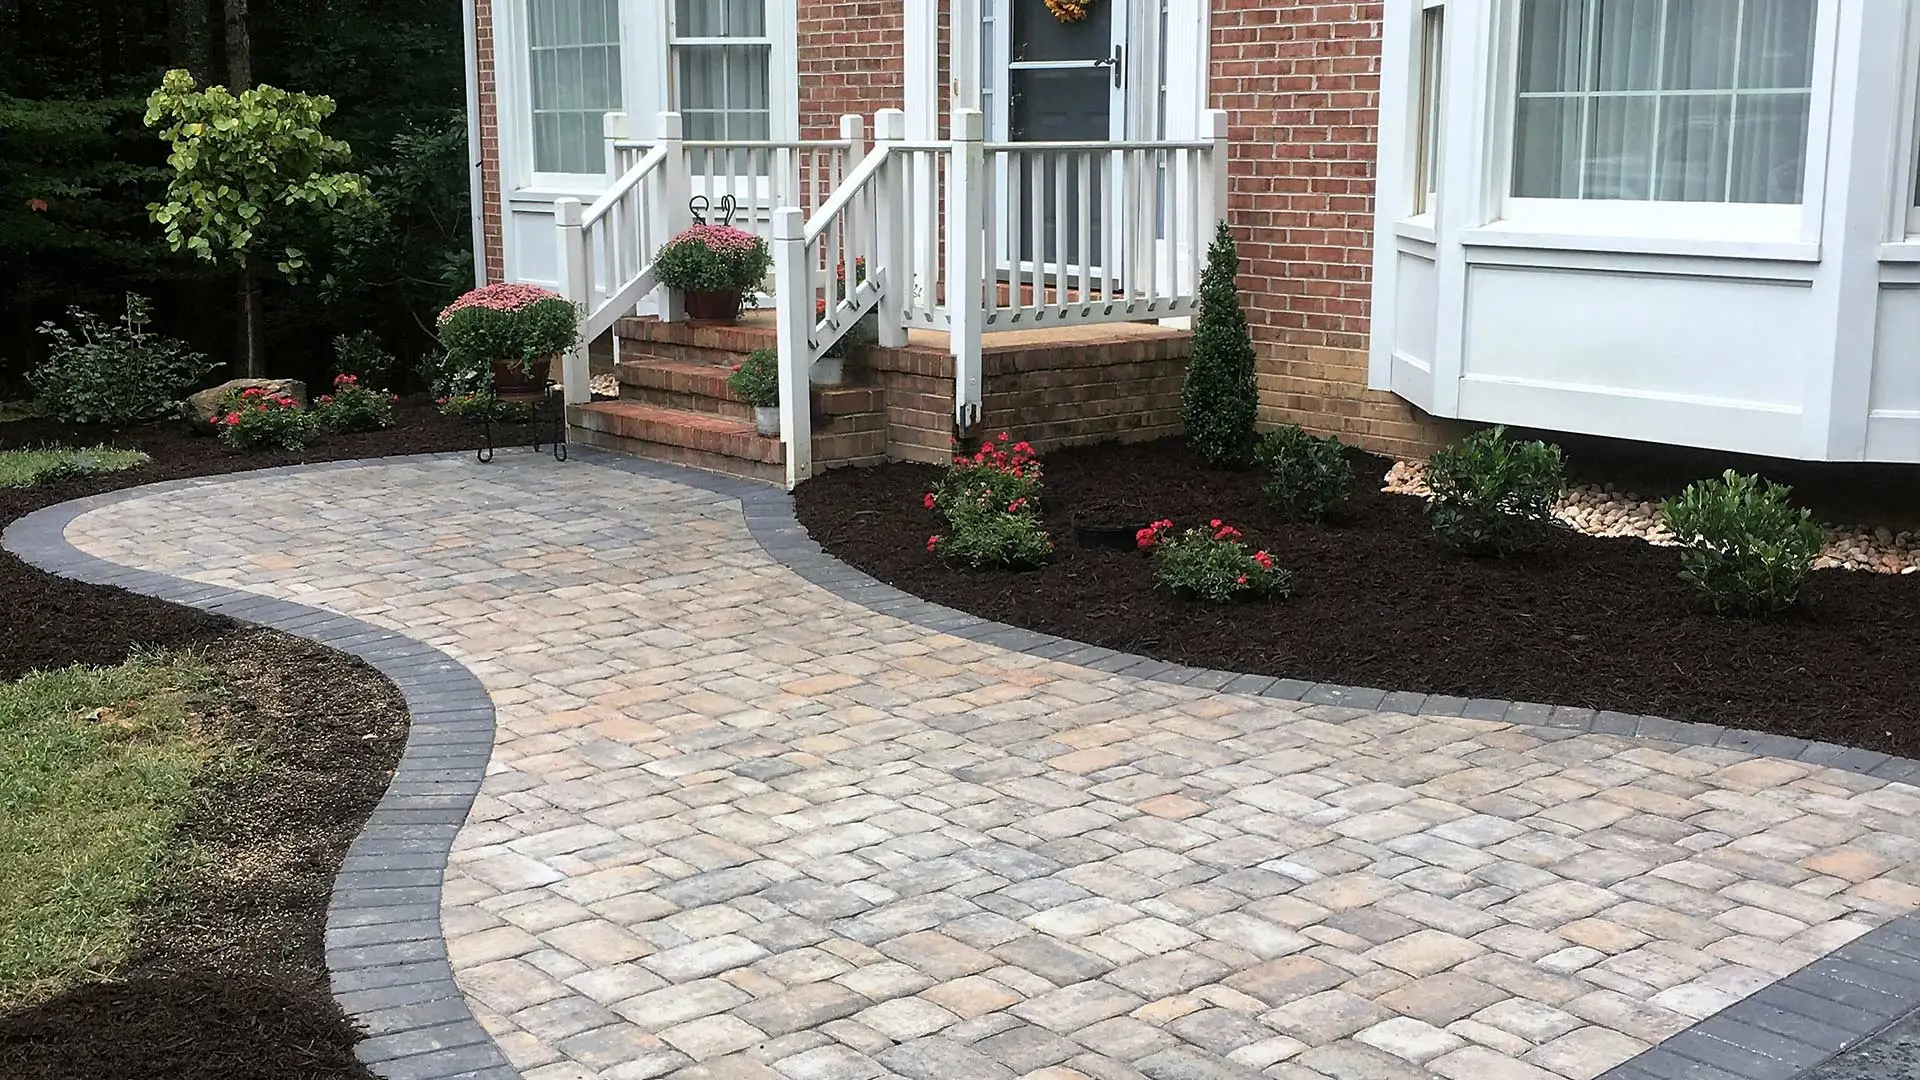 Pavers - The BEST Option for Your New Patio